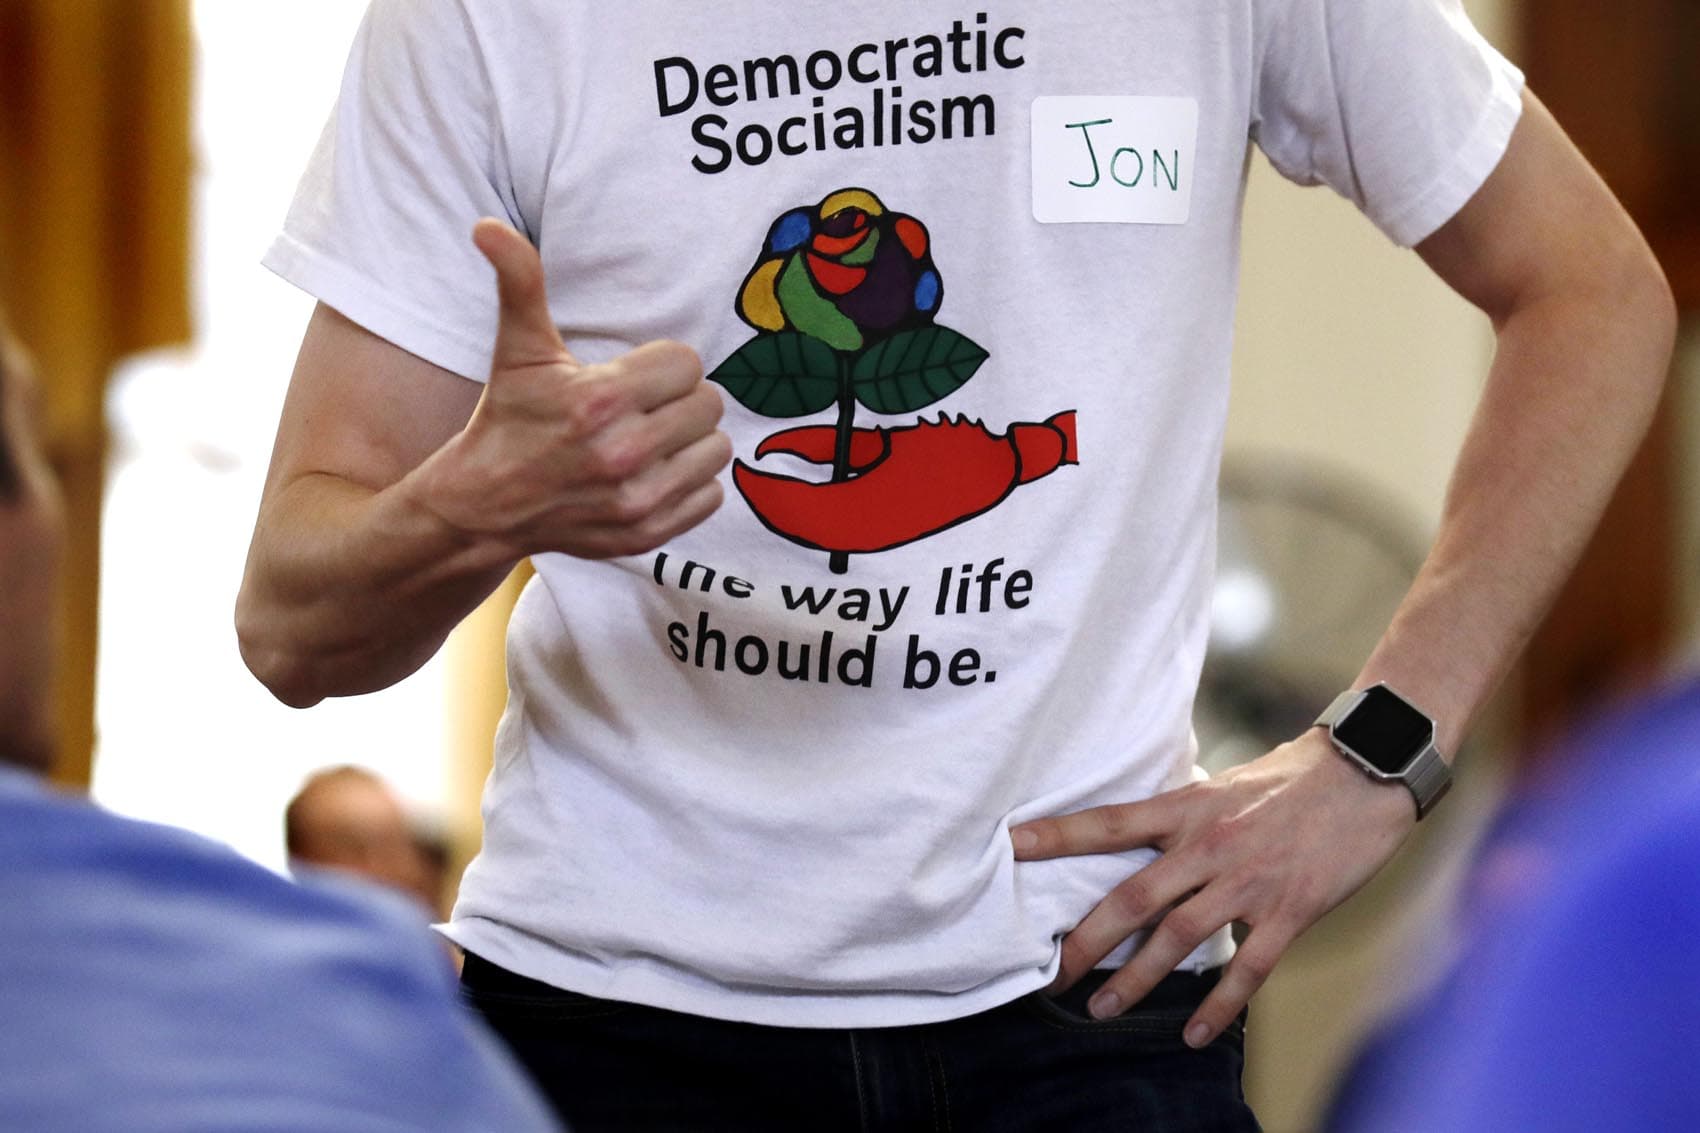 Jon Torsch, center, wears a T-shirt promoting democratic socialism during a gathering of the Southern Maine Democratic Socialists of America at City Hall in Portland, Maine, Monday, July 16, 2018. On the ground in dozens of states, there is new evidence that democratic socialism is taking hold as a significant force in Democratic politics. (Charles Krupa/AP)